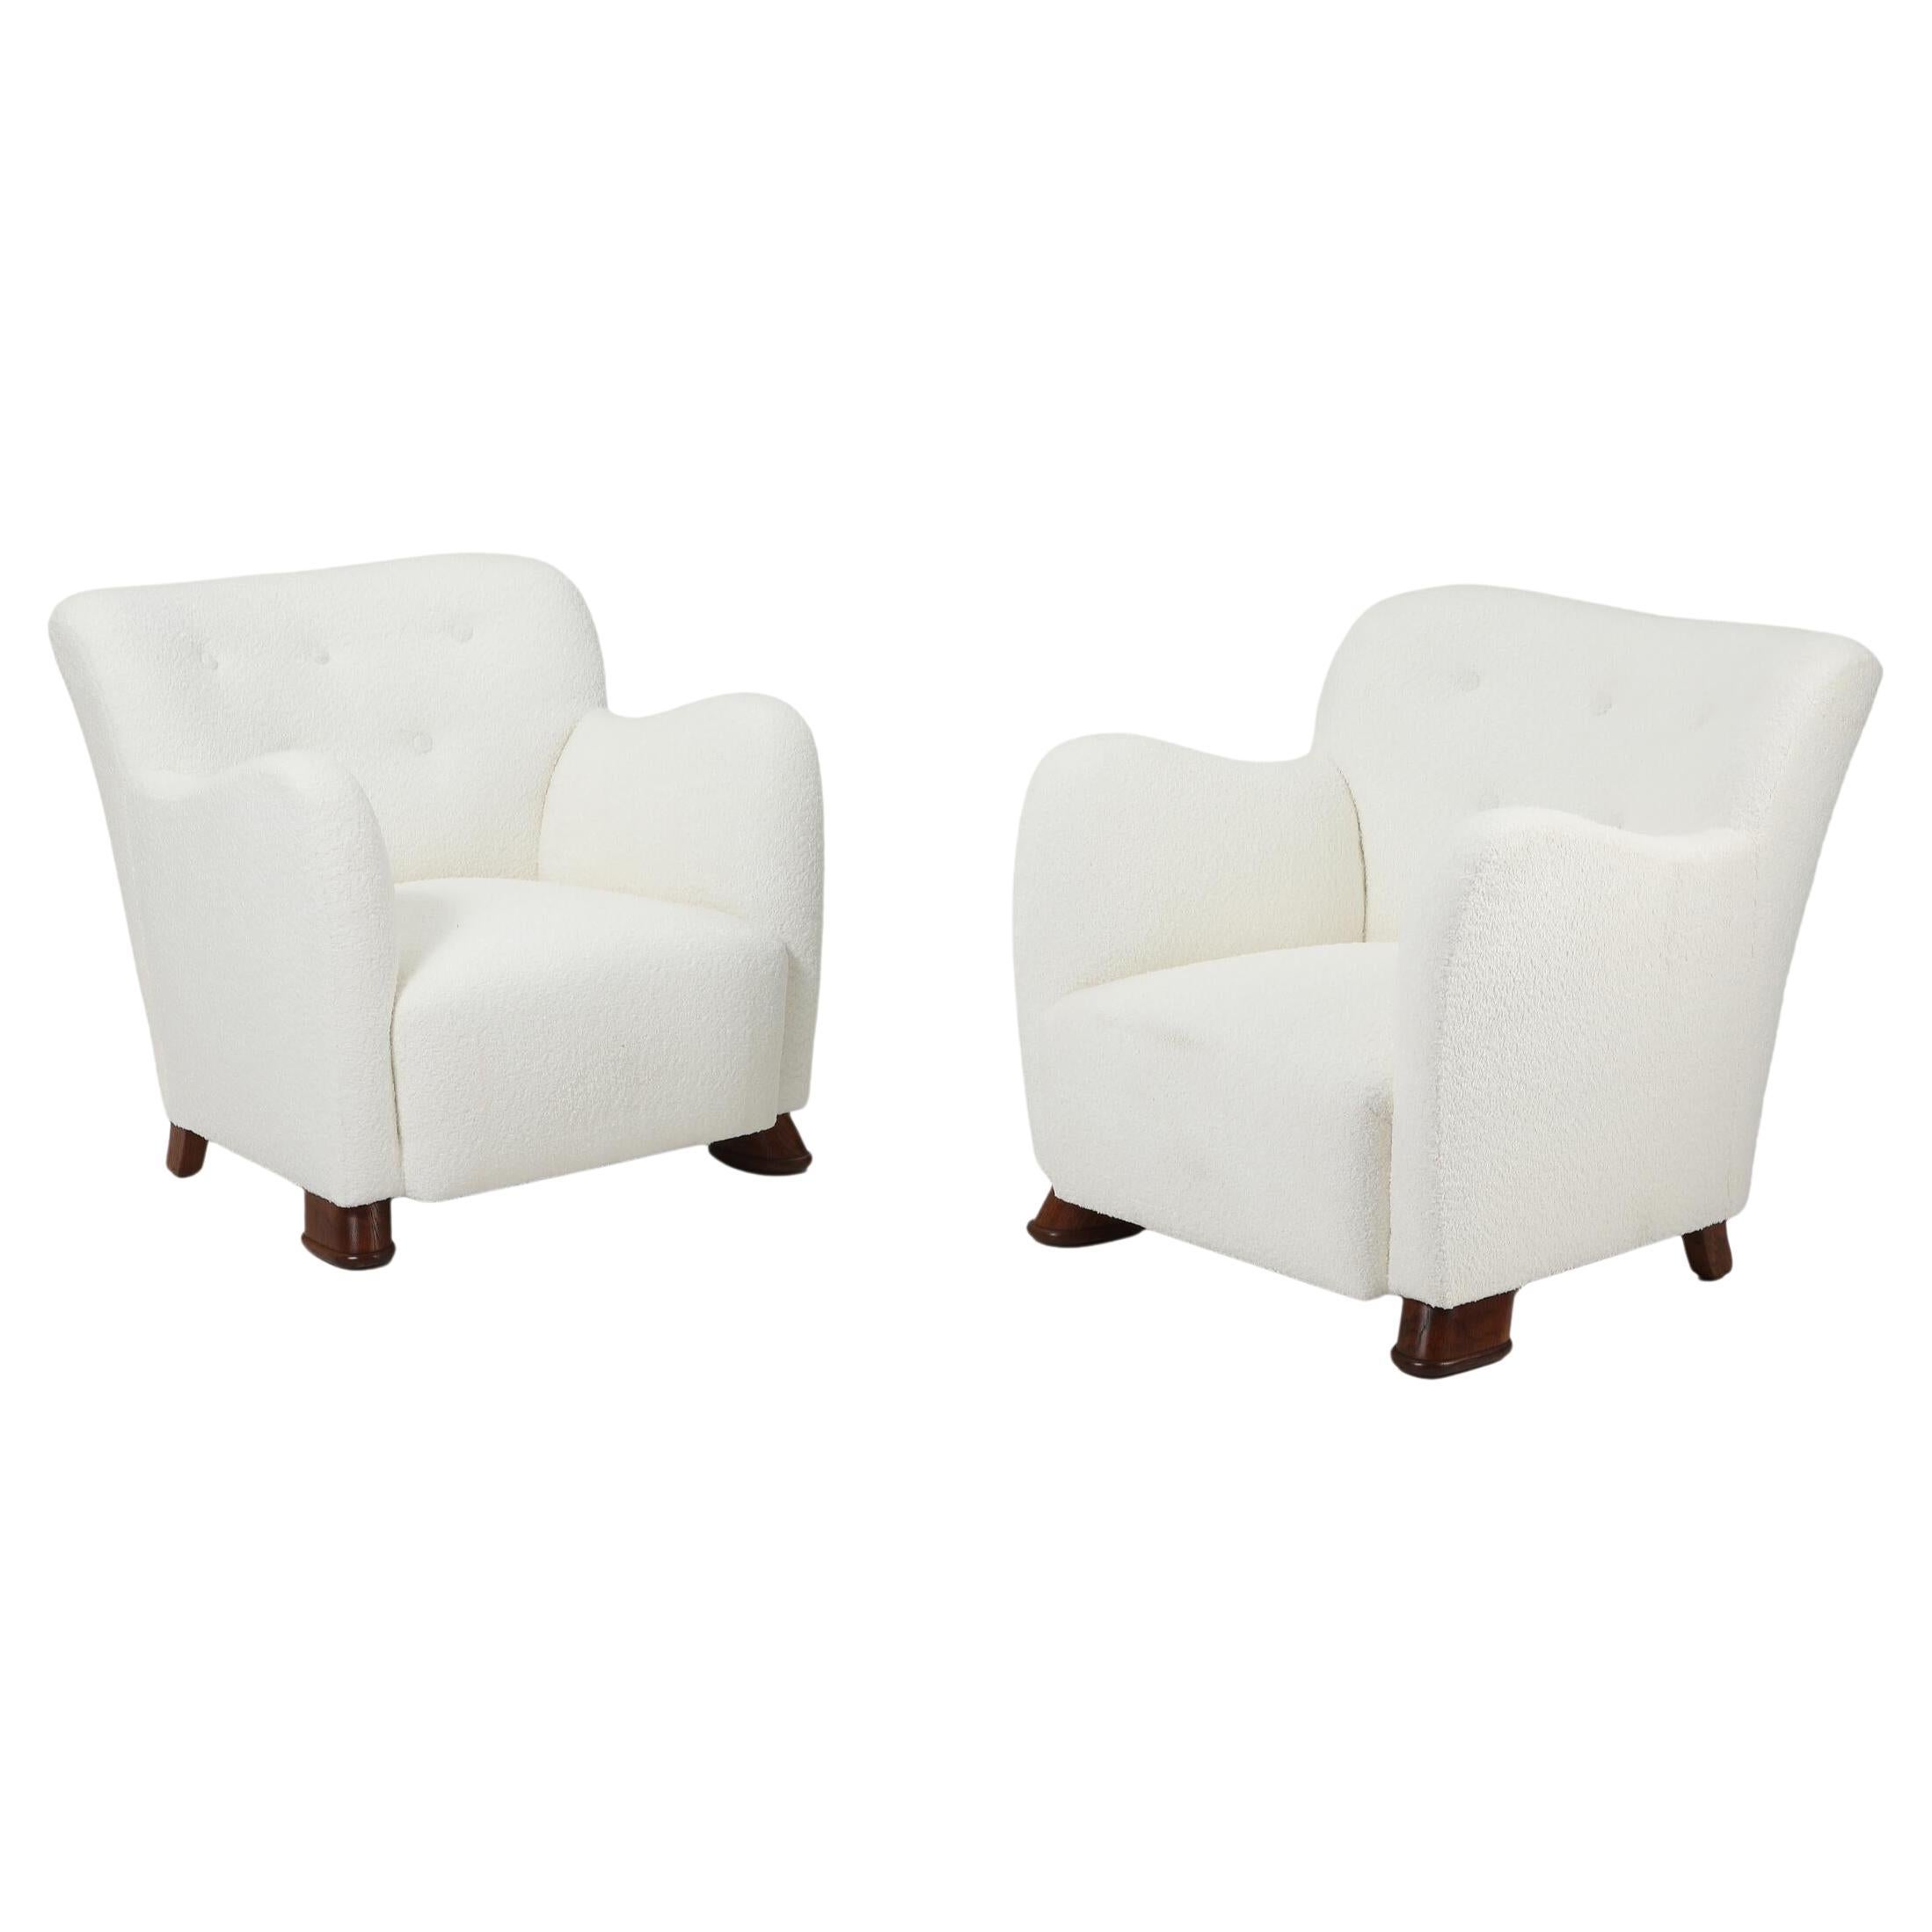 Pair of Danish Design Armchairs Upholstered Light Boucle. Sweden, 1940s For Sale